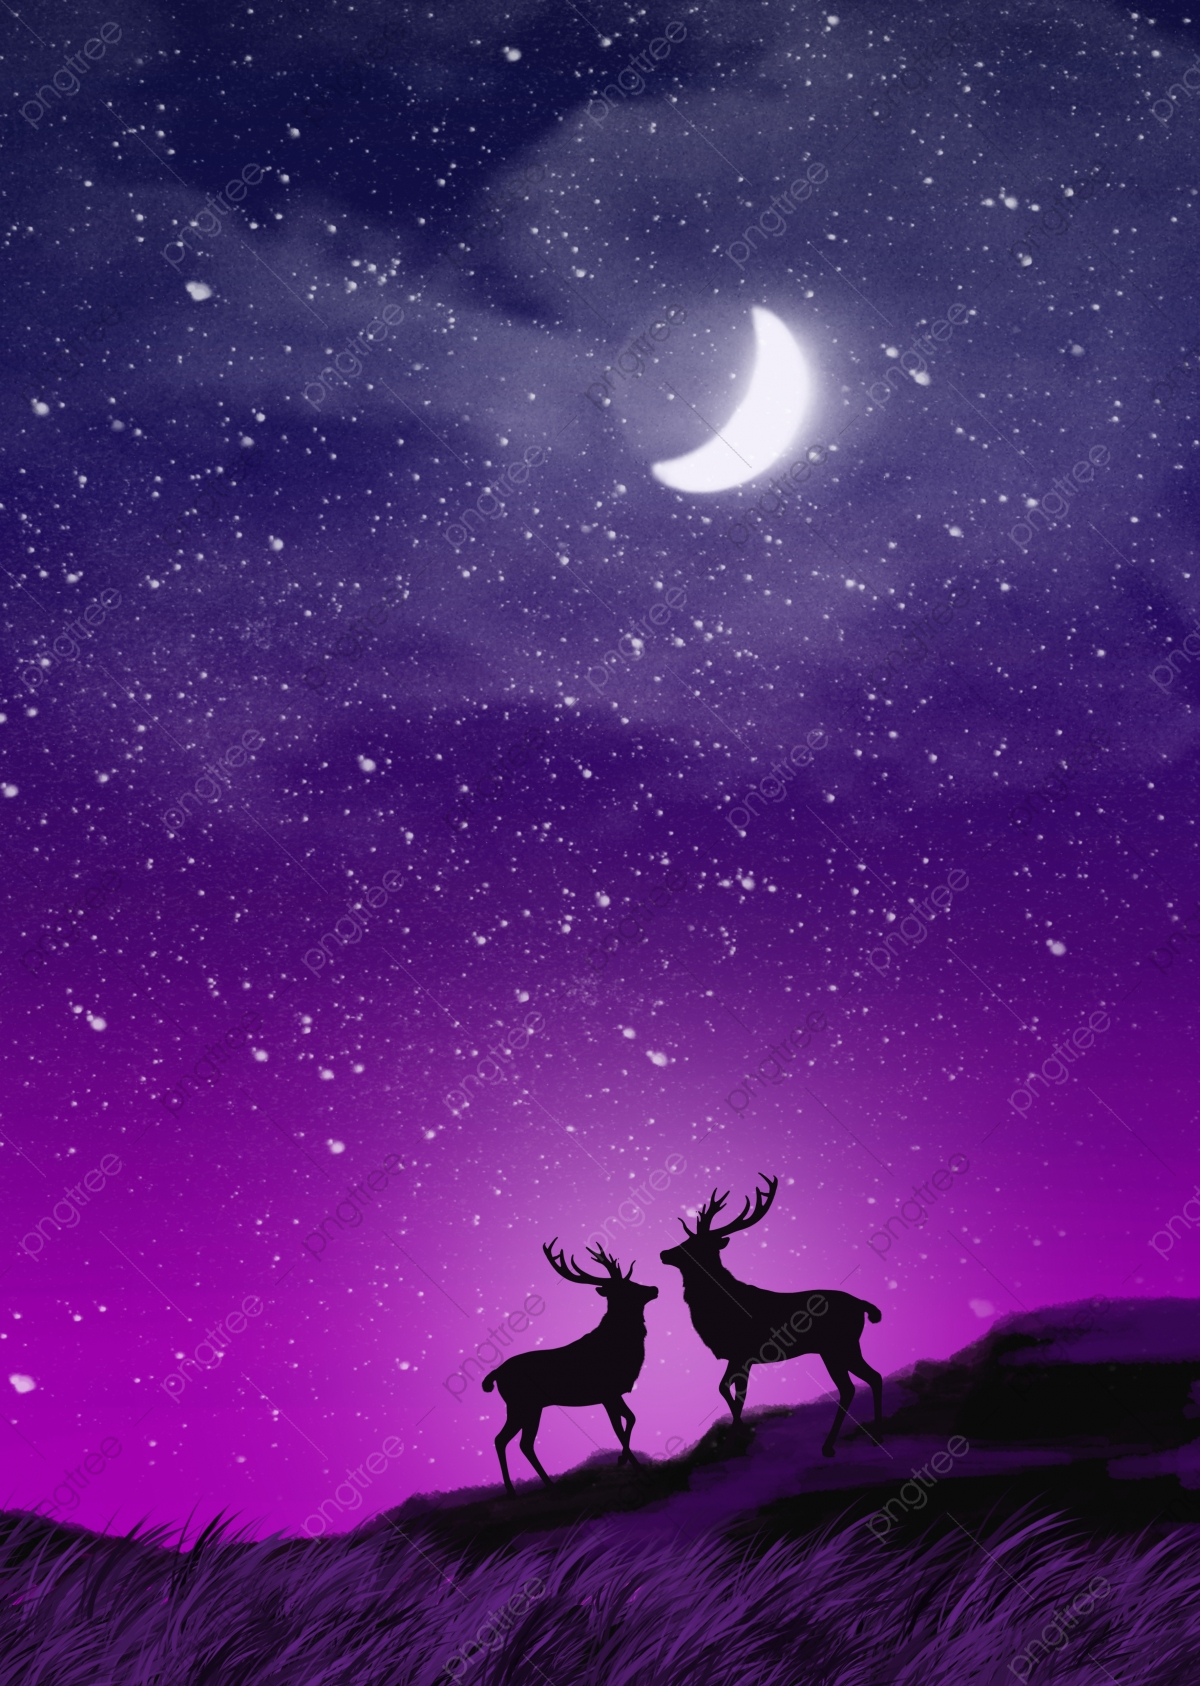 Lantern Child With A Deer In The Night
 Wallpapers